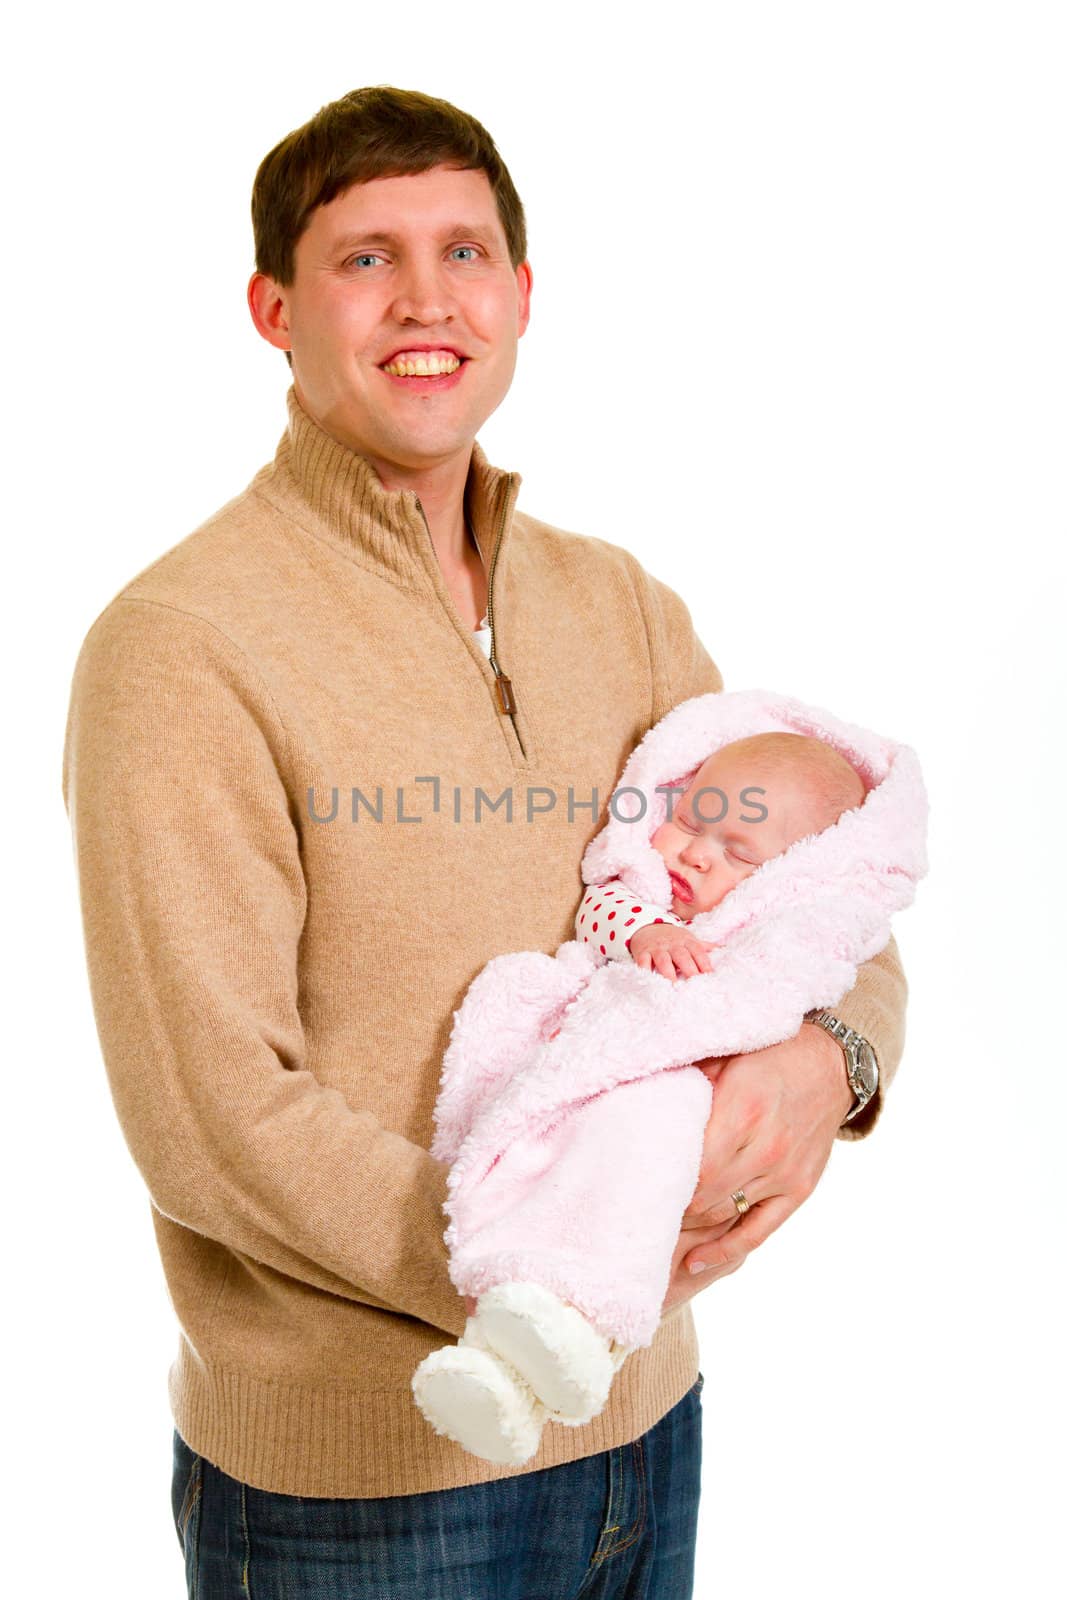 A family portrait of three people in the studio including mother father and newborn baby girl.